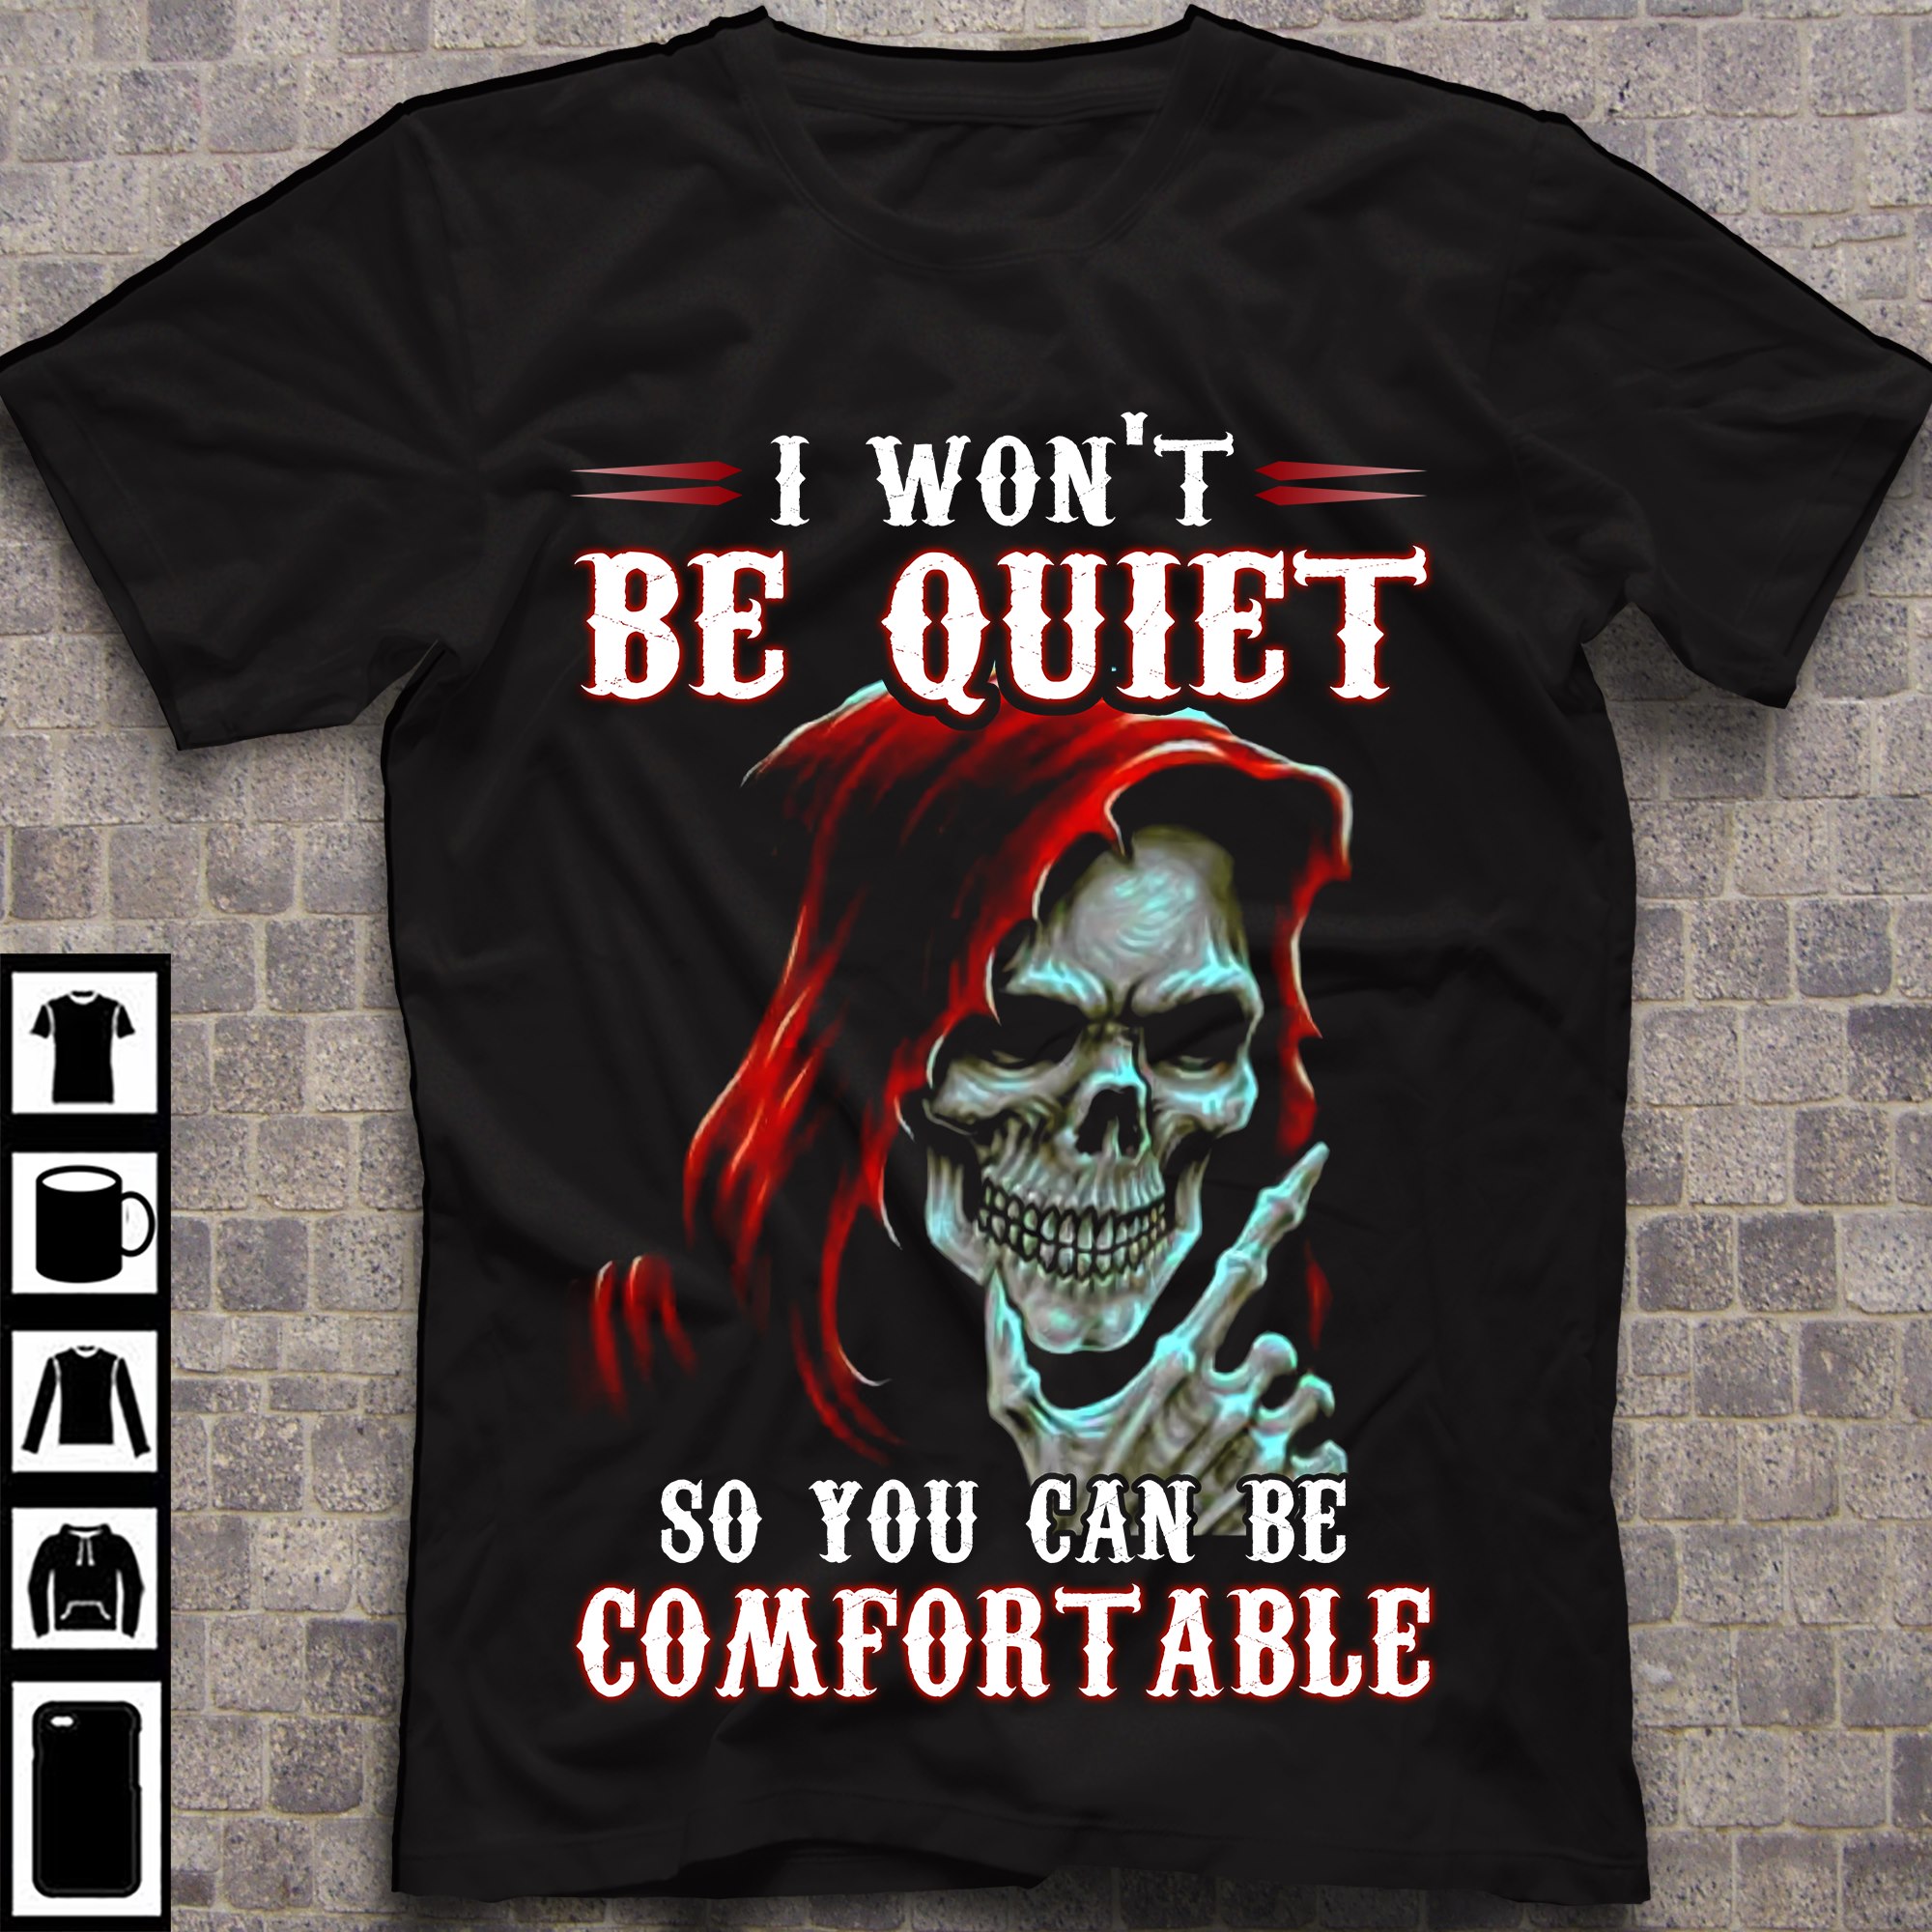 I won't be quiet so you can be comfortable - Evil